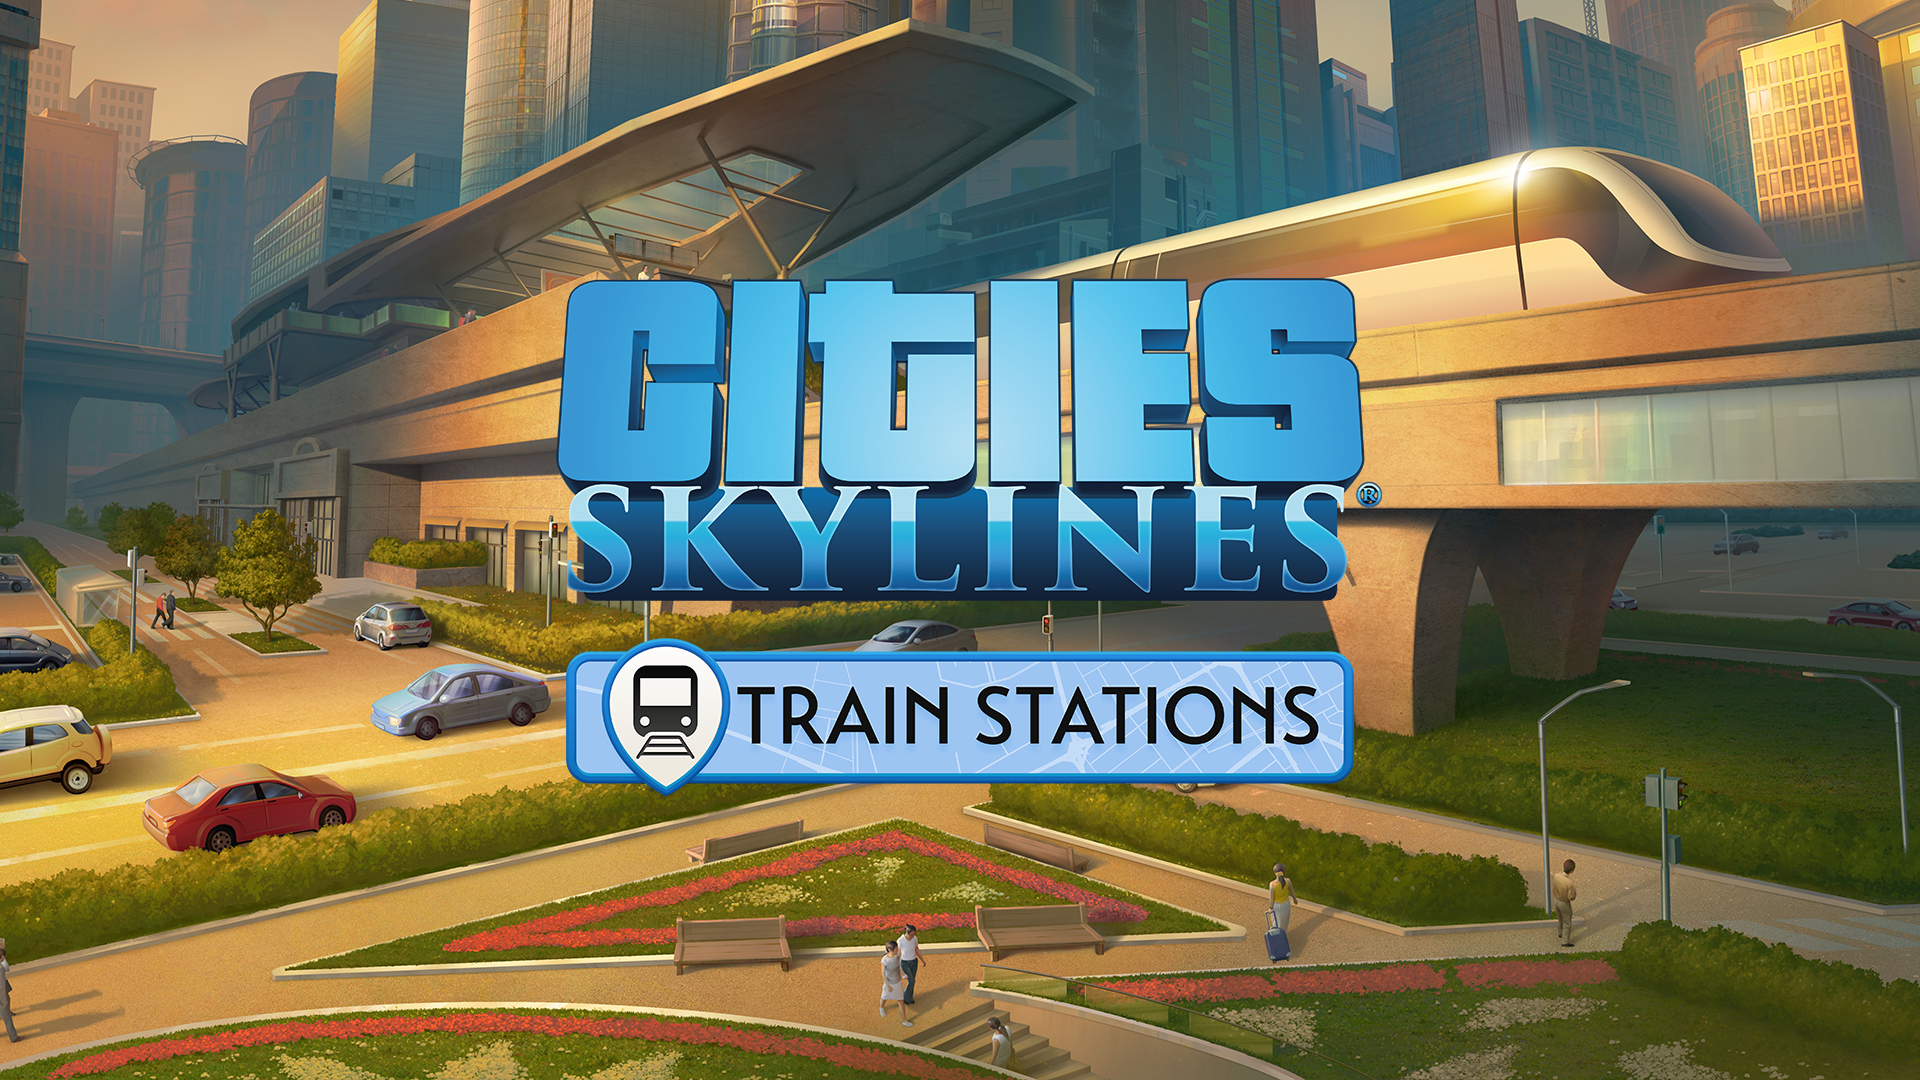 cities skylines deluxe edition $10 sale